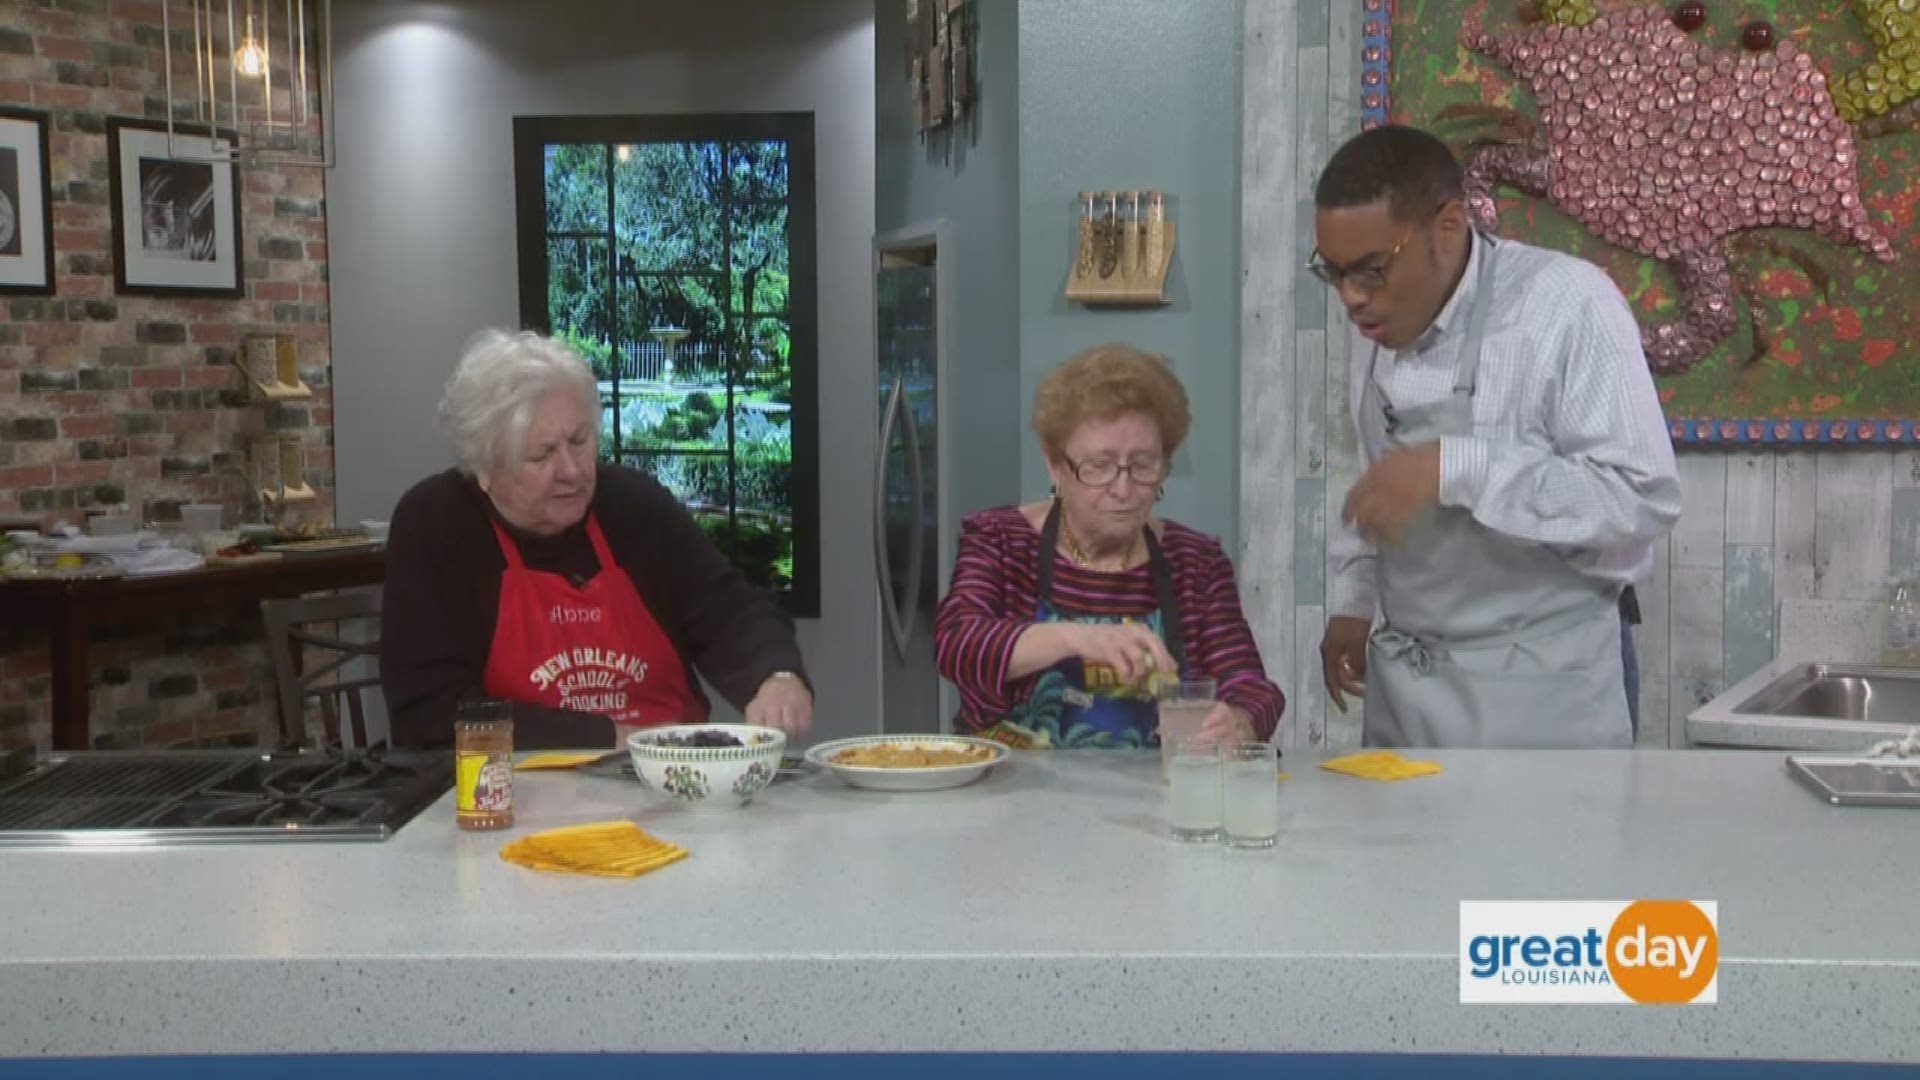 The NOLA grandmas from the New Orleans School of Cooking stopped by to show us a perfect pair of appetizer and drink.